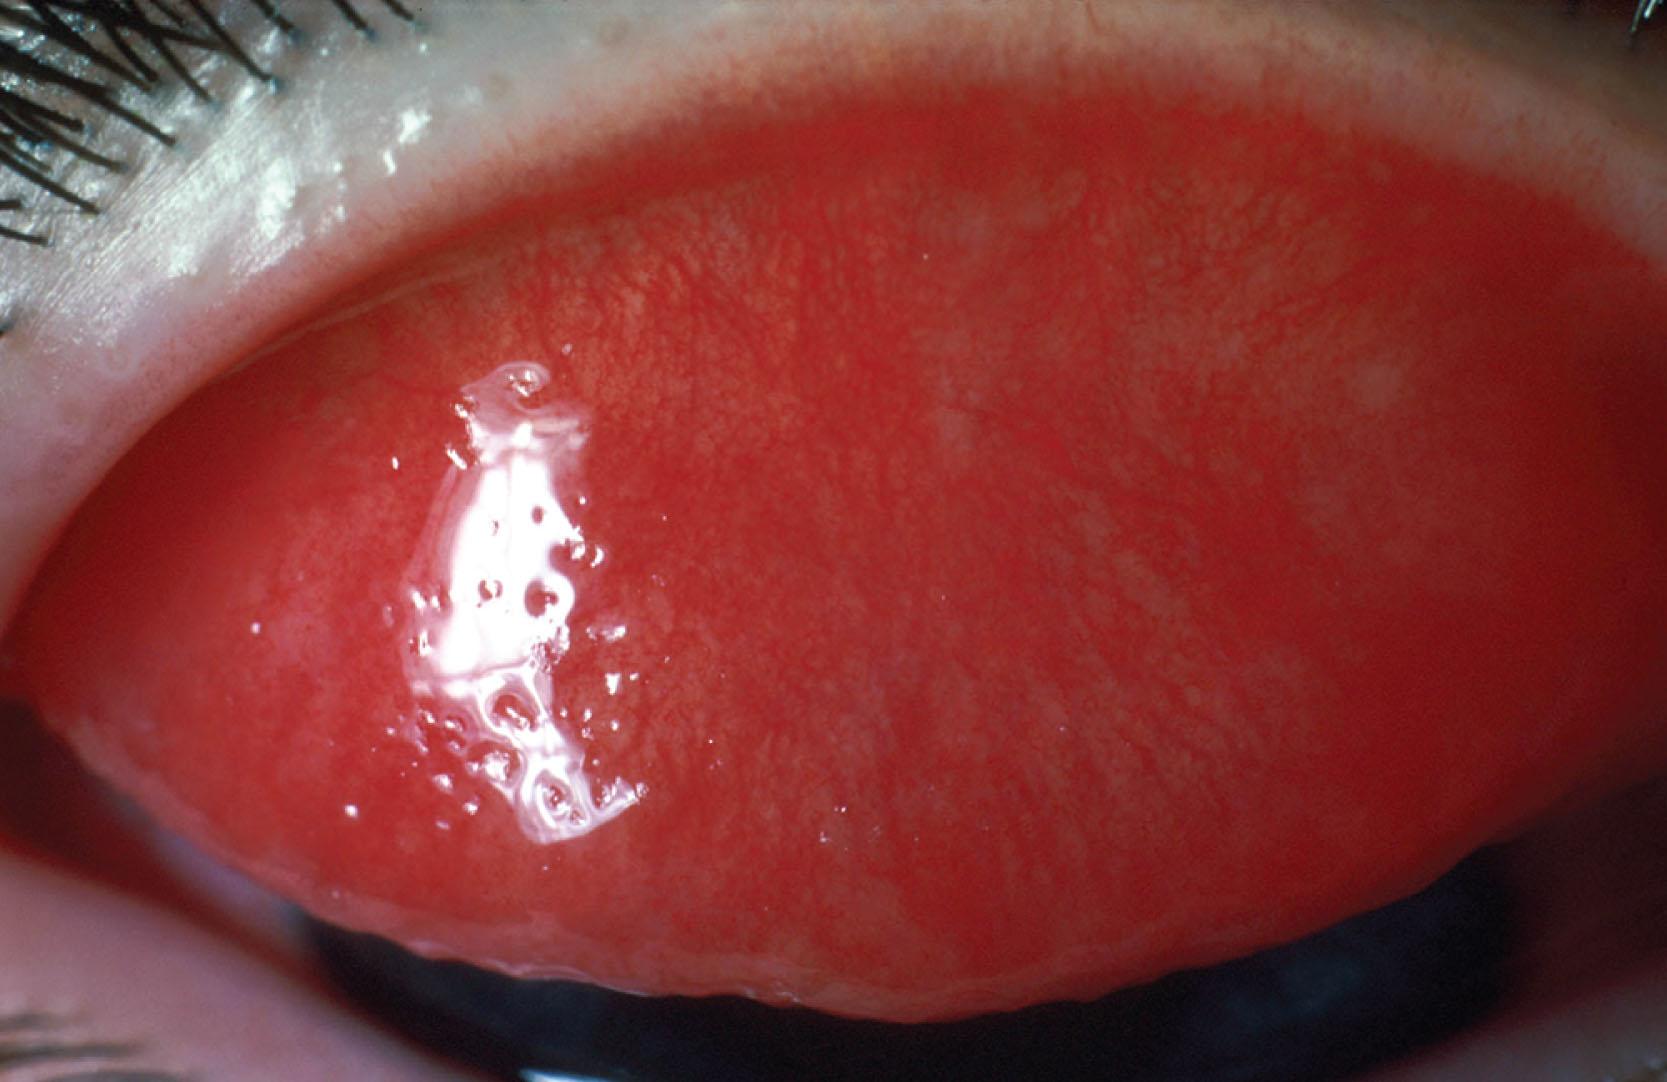 Fig. 15.14, Intense papillary conjunctival response over the upper tarsal plate in acute adenovirus infection. A follicular change may predominate over the lower tarsal conjunctiva.